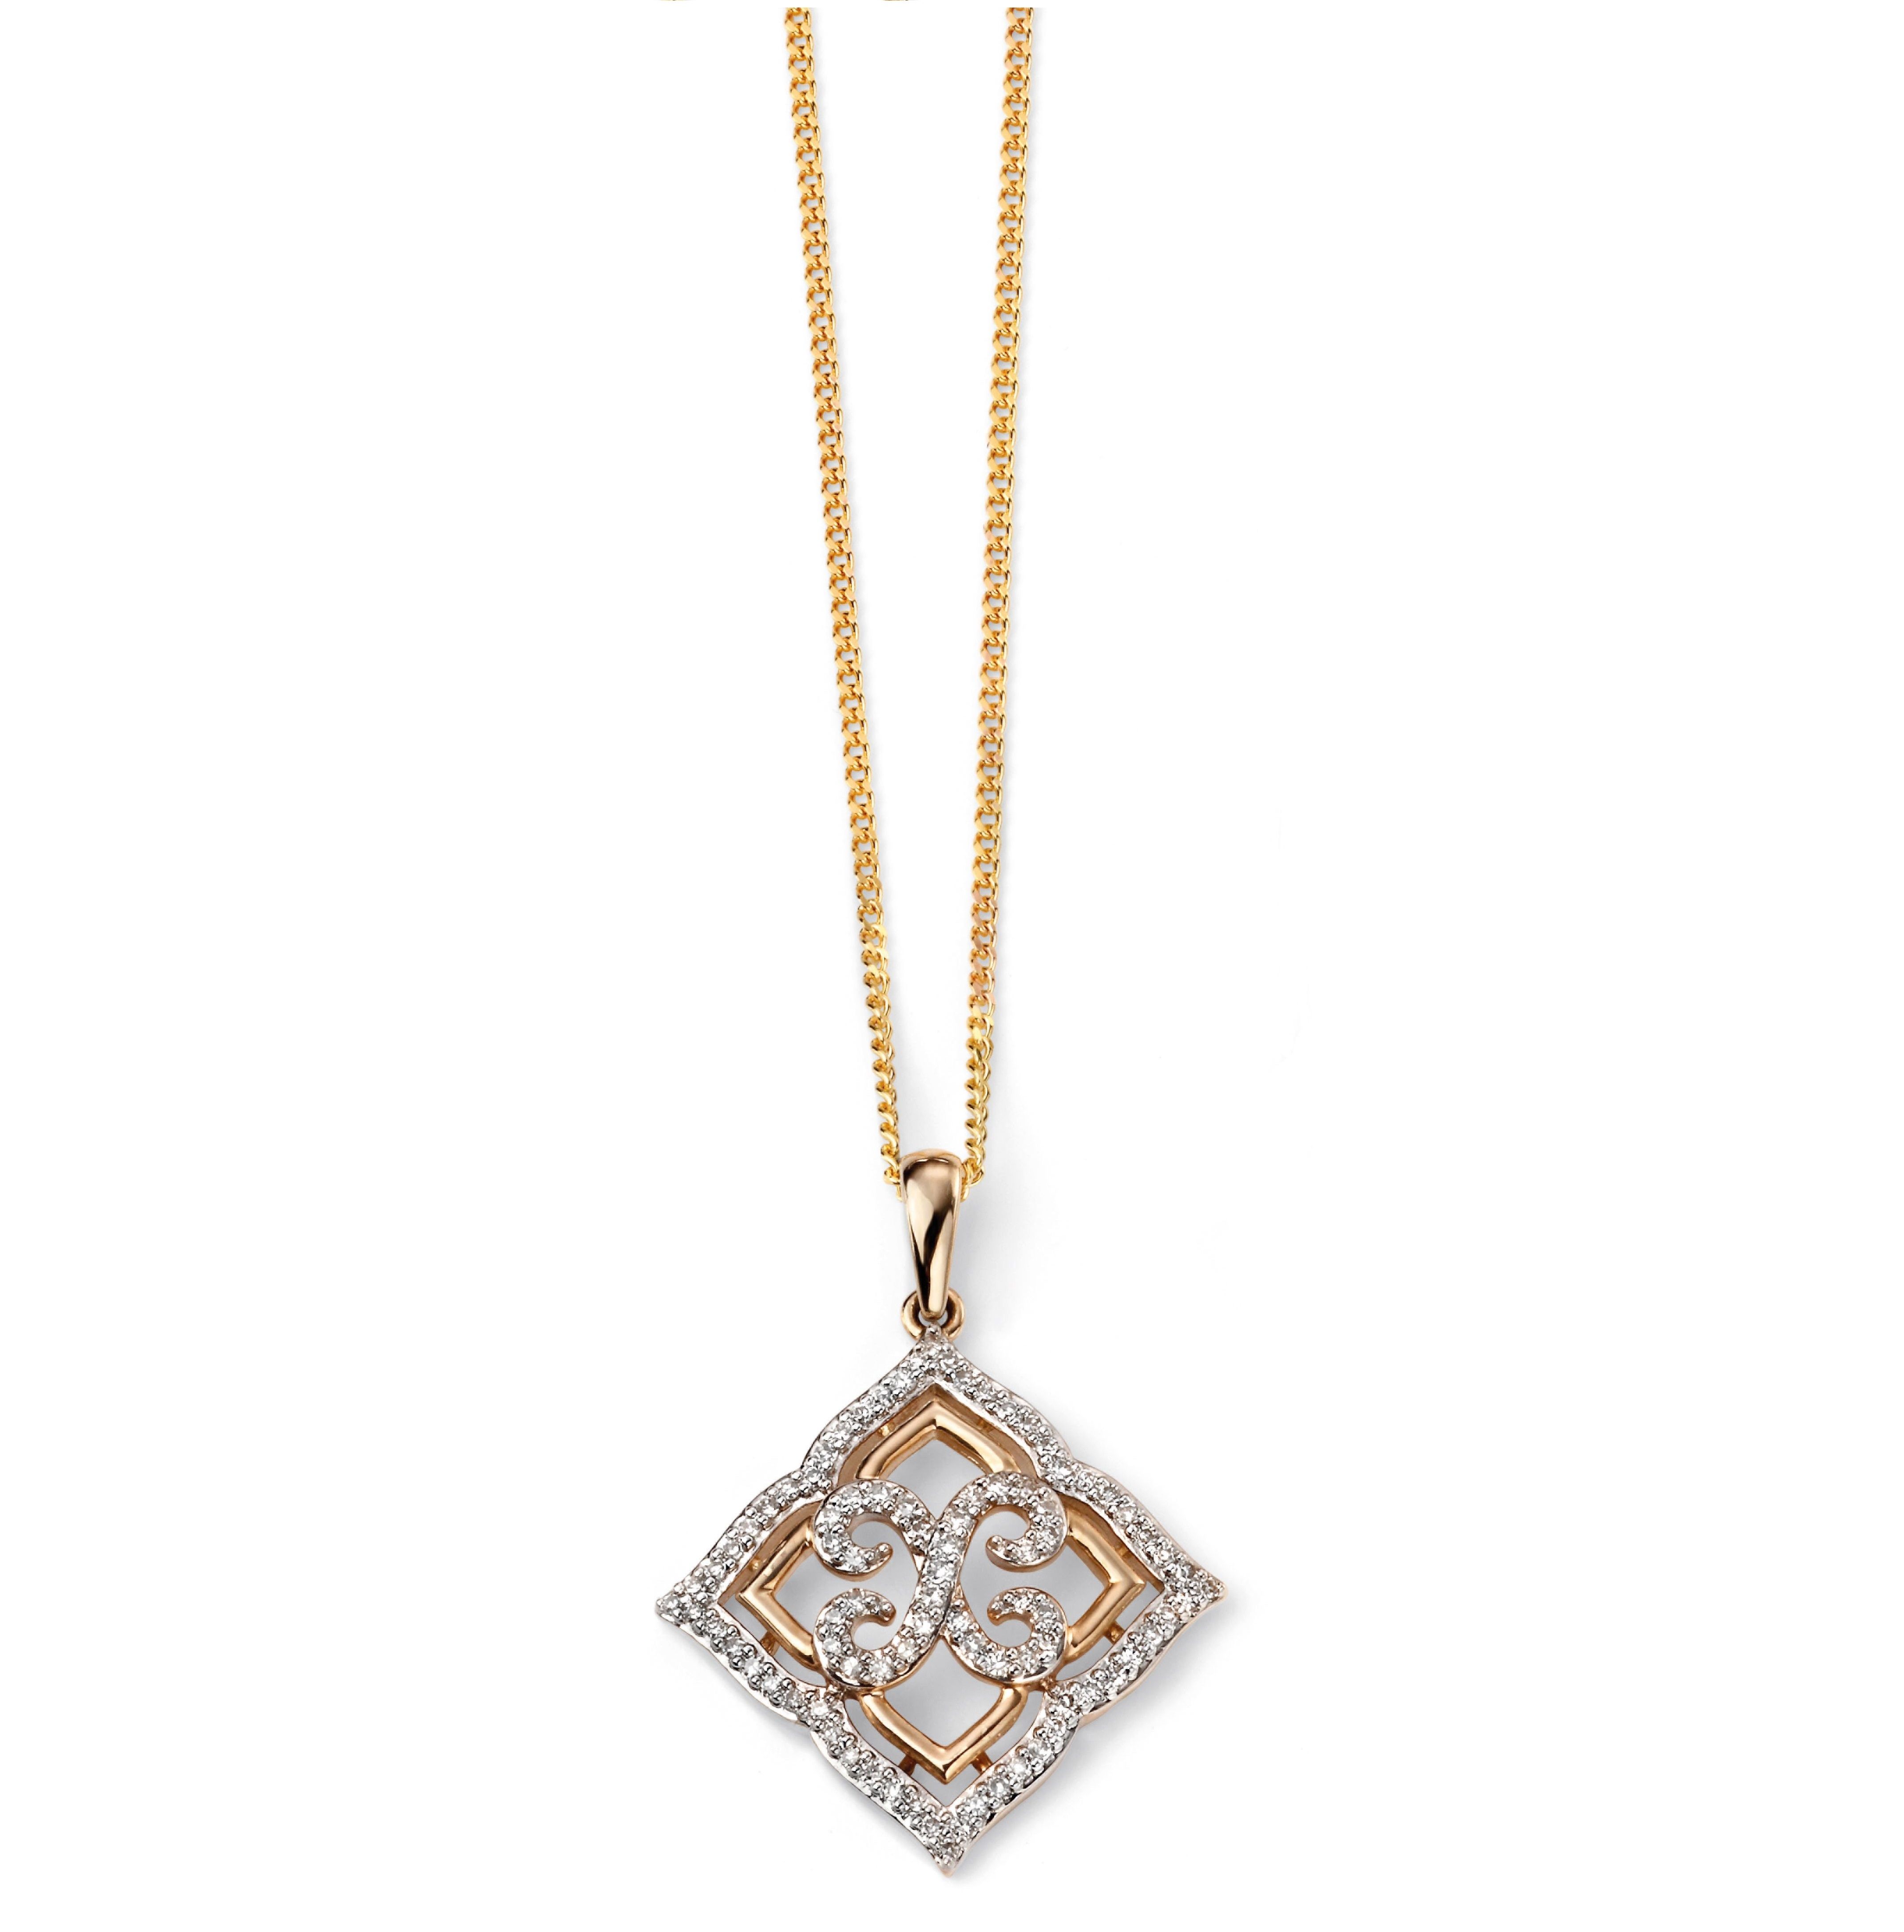 Buy Elements Gold 9ct Yellow Gold Diamond Lace Pendant Online